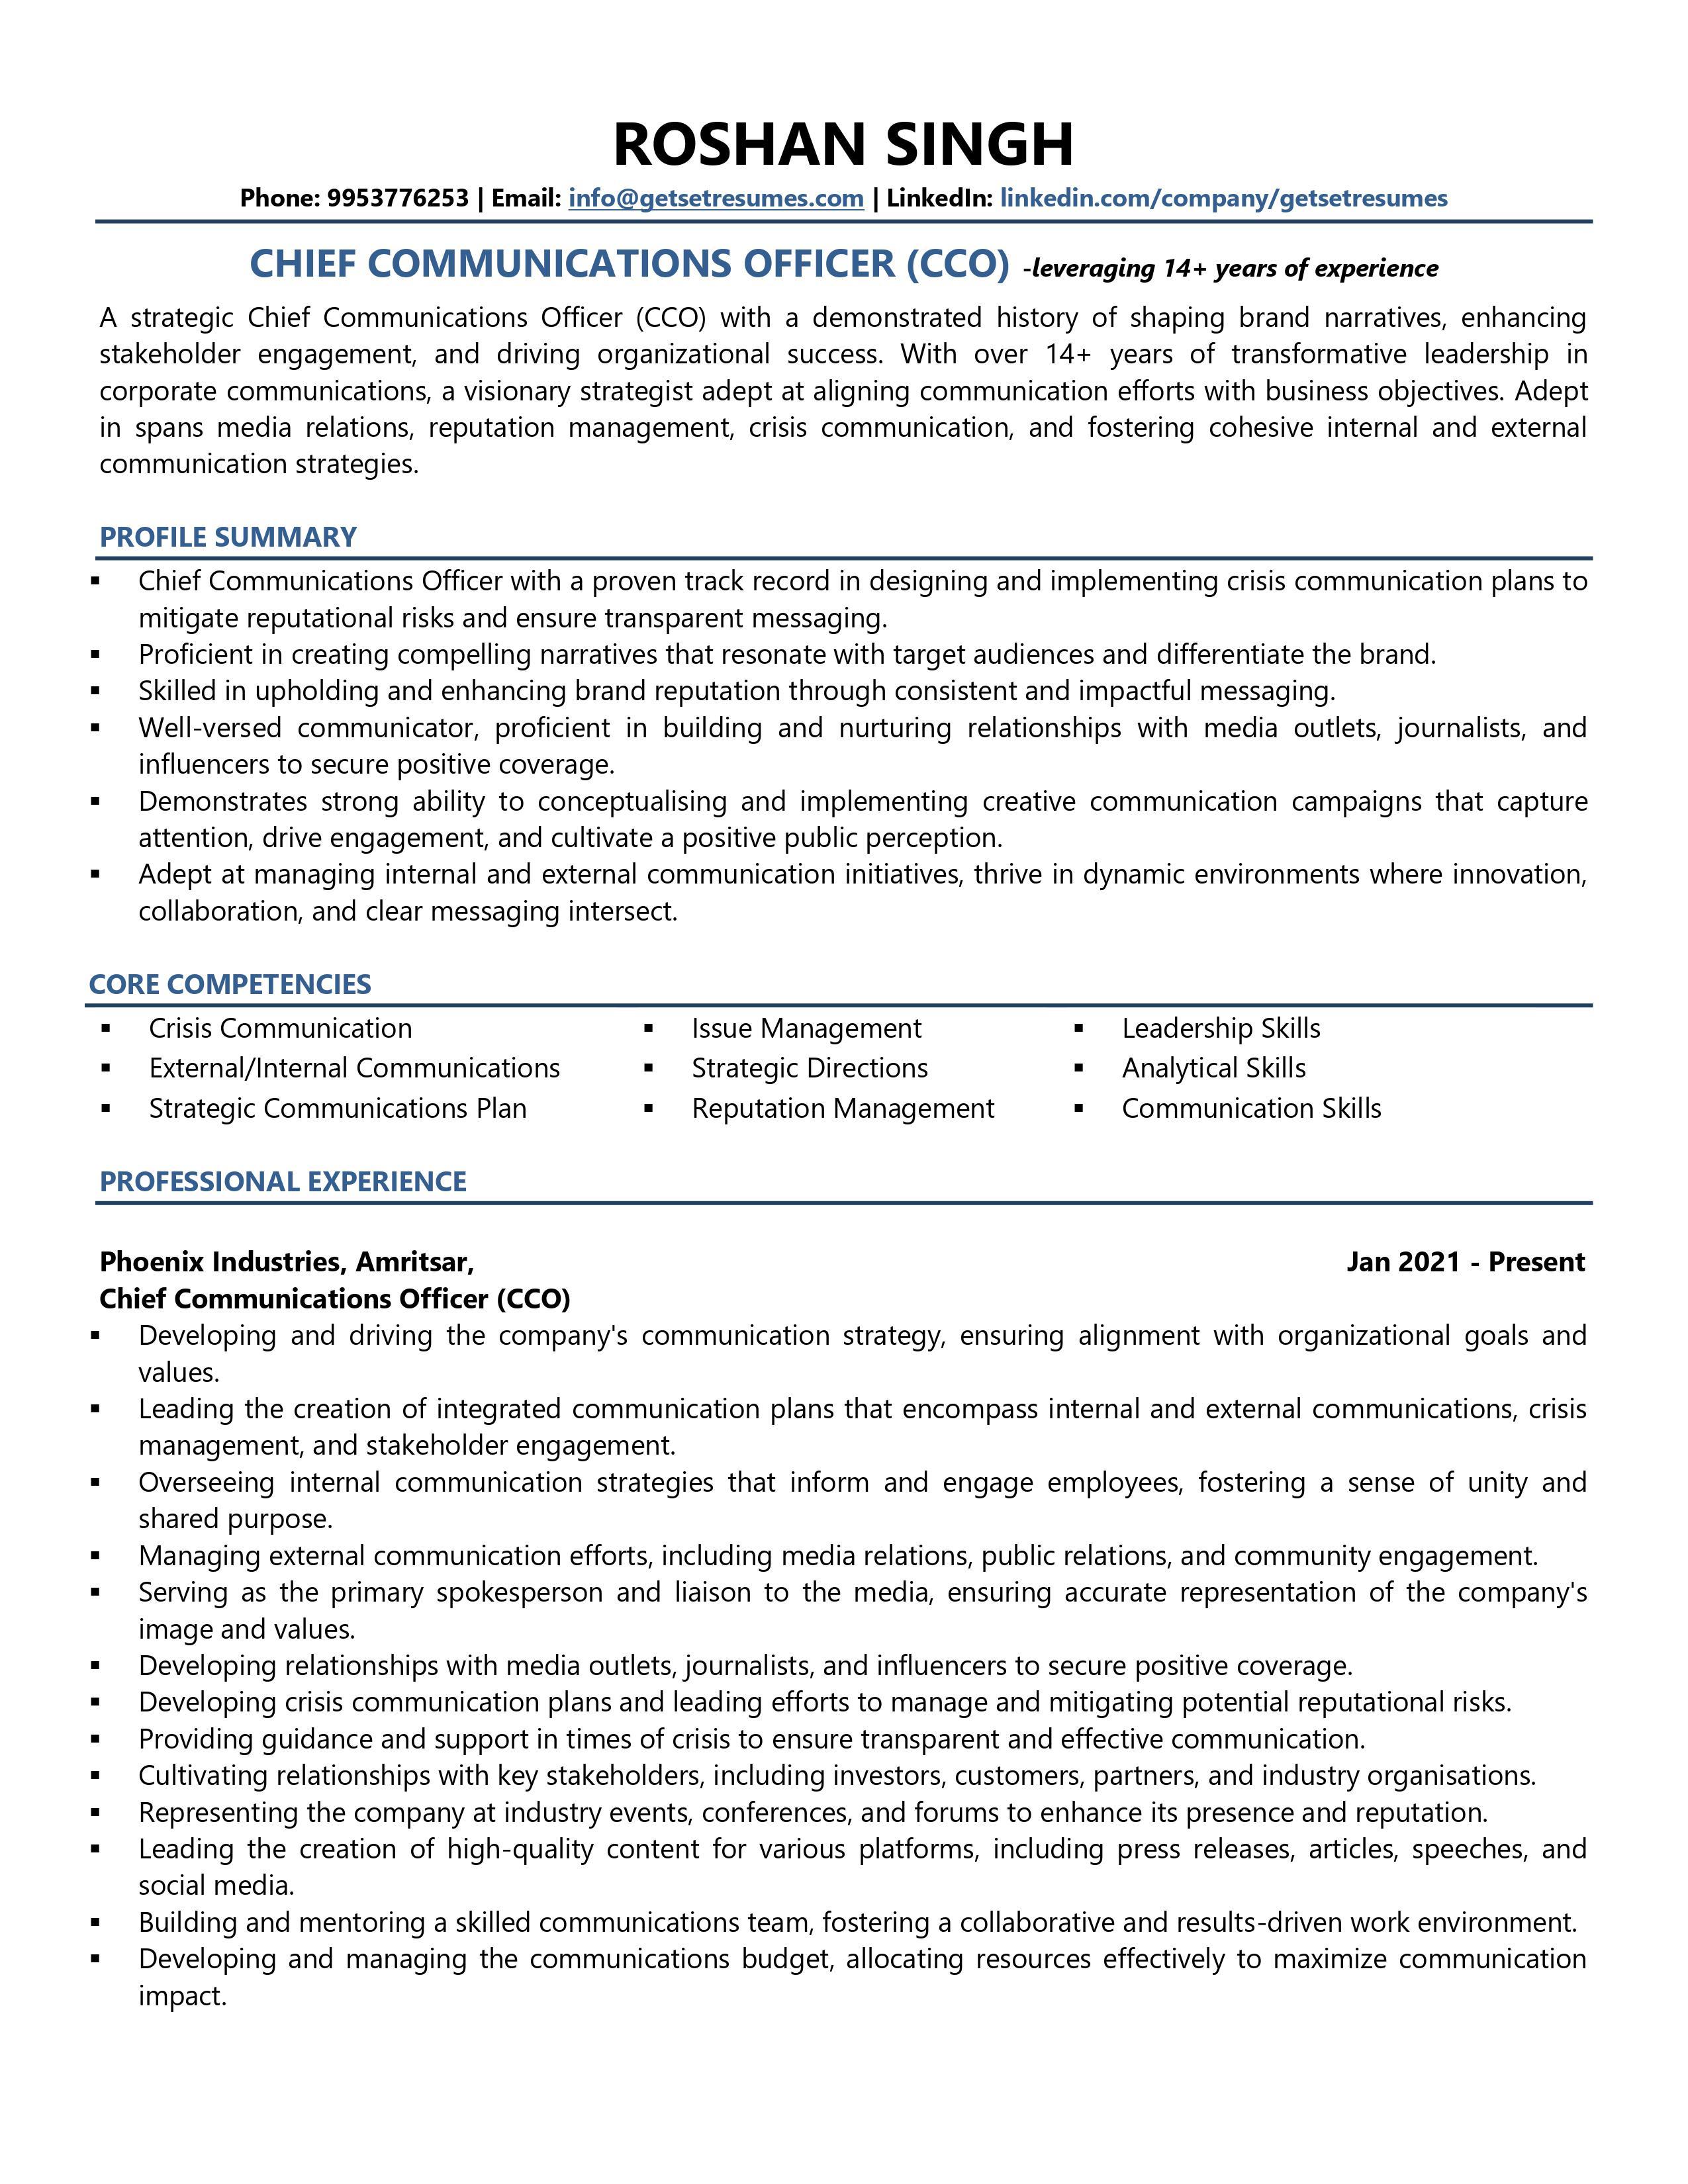 Chief Communication Officer - Resume Example & Template